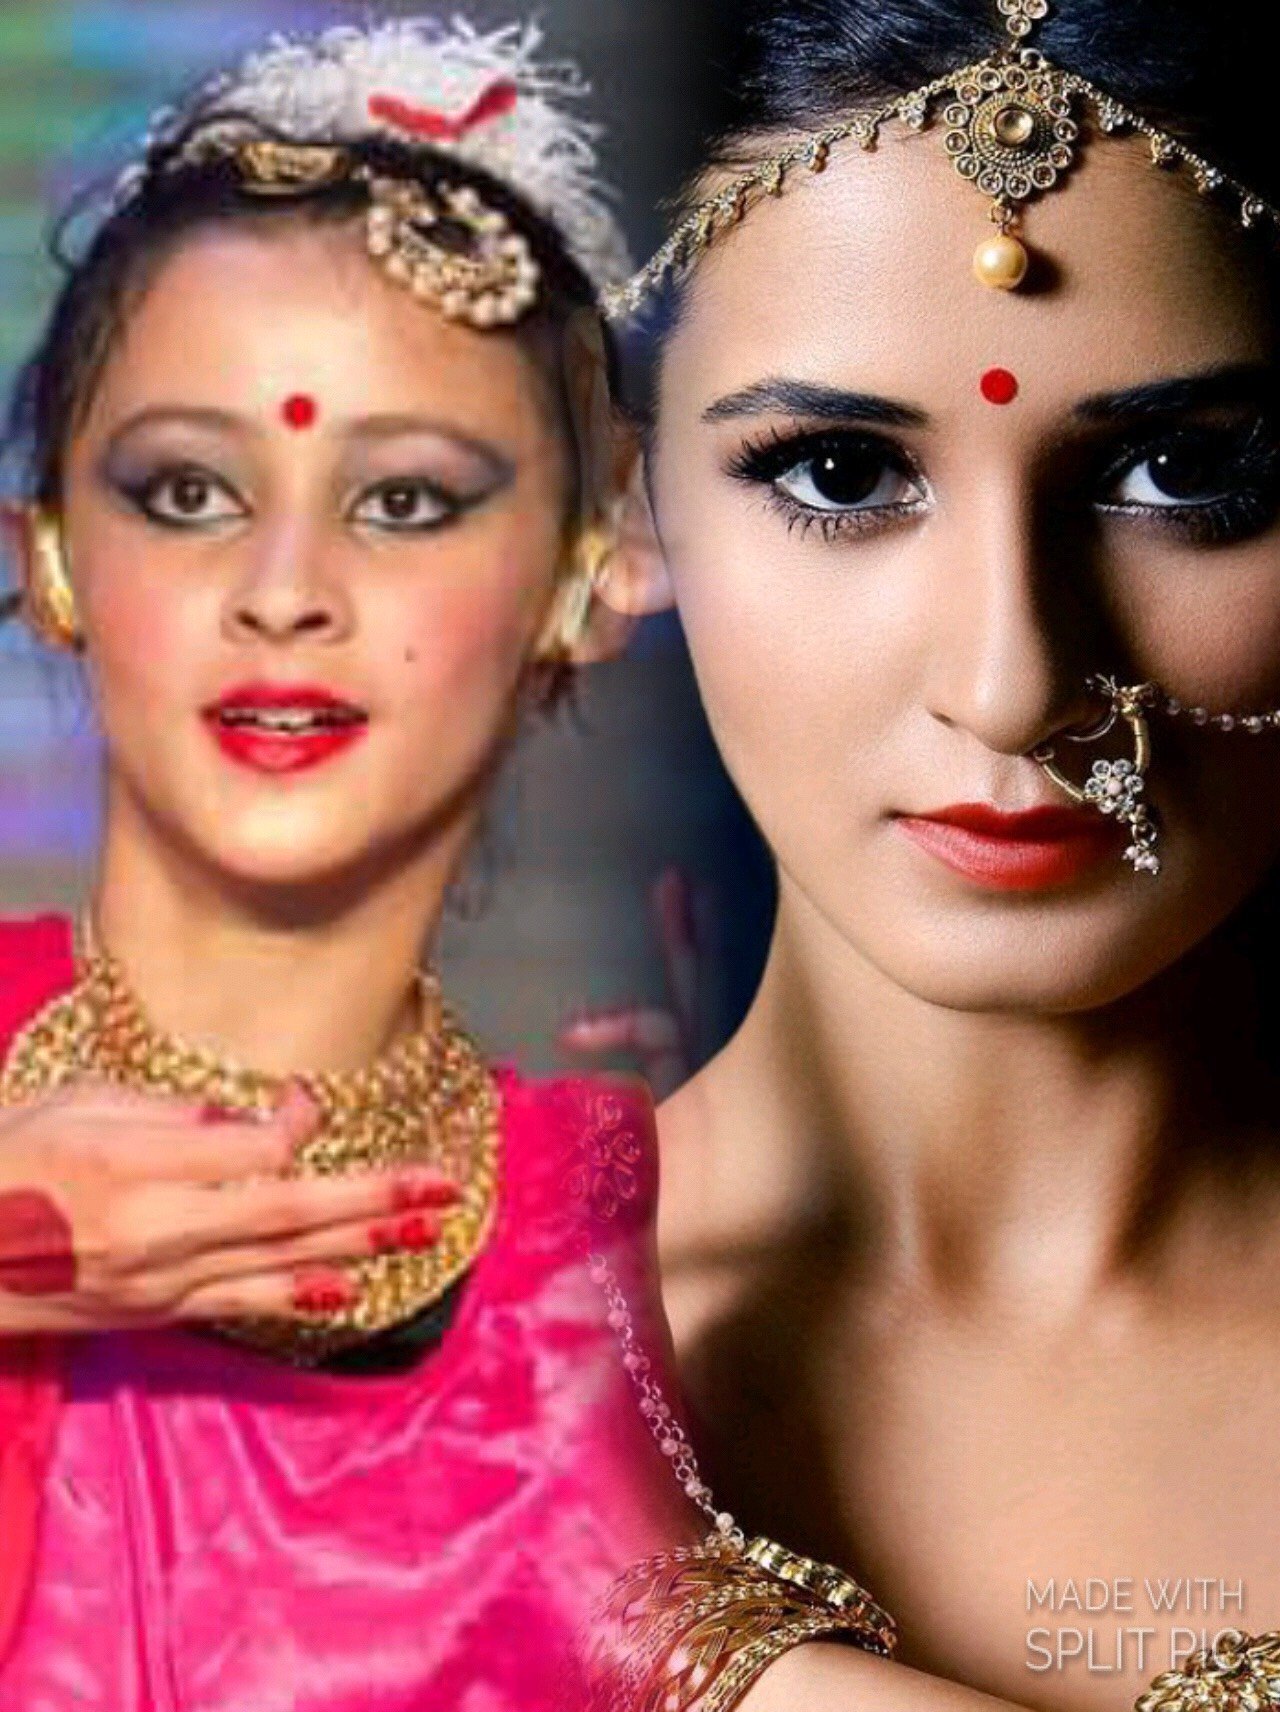 I call @mohanshakti my INSPIRATION! i want to become a dancer like her💃🏼”शक्ति नृत्य है और नृत्य शक्ति है🍃” this page is to convey my love towards you♥️